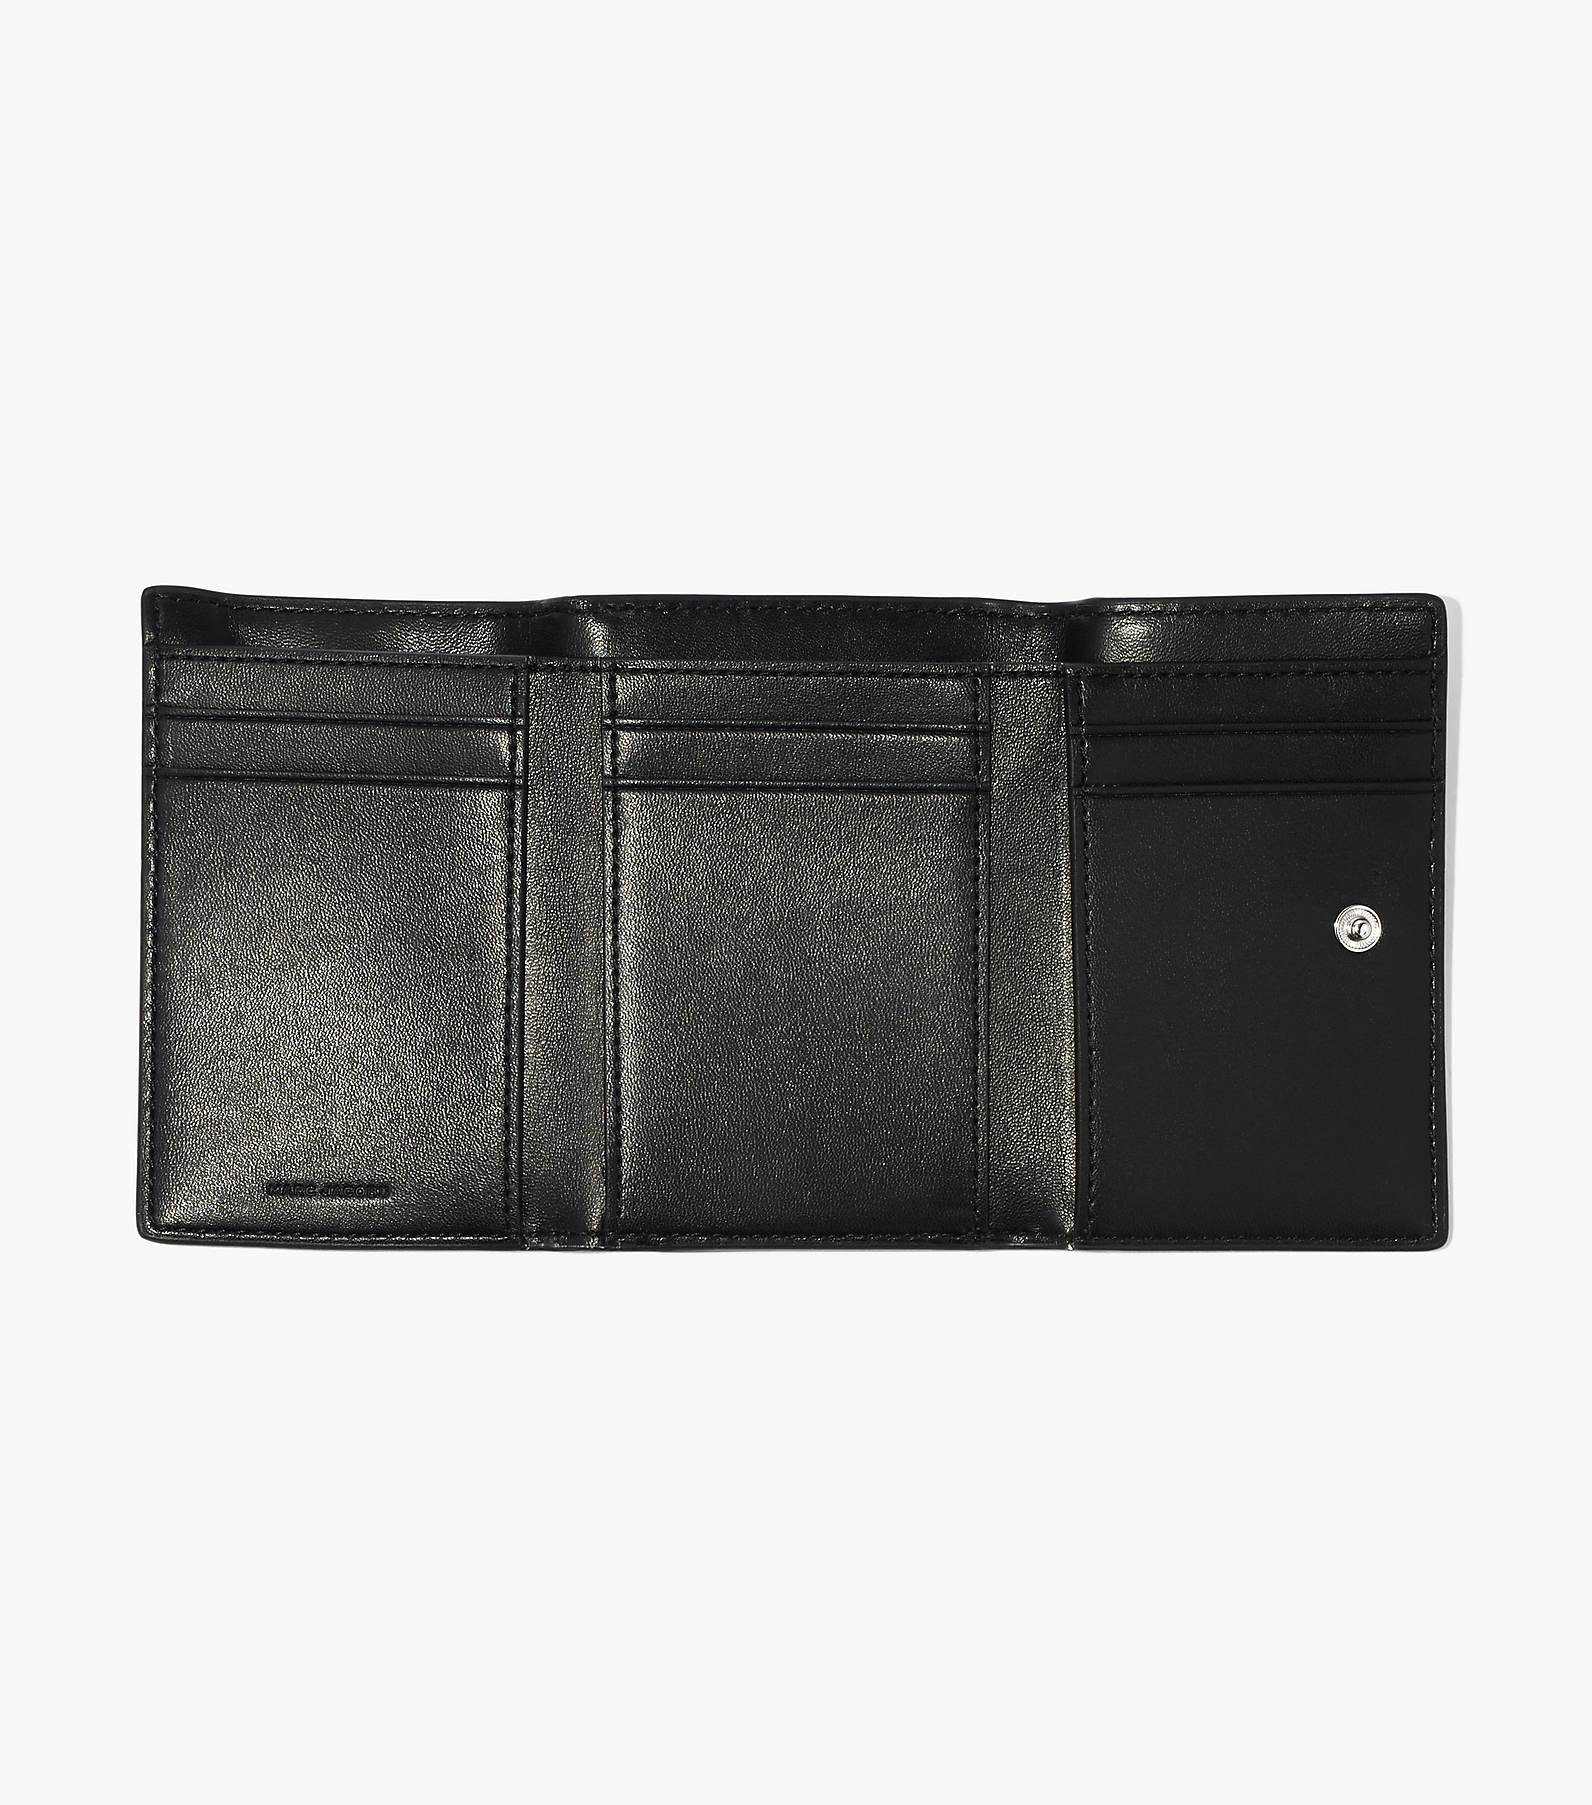 The Monogram Medium Trifold Wallet | Marc Jacobs | Official Site